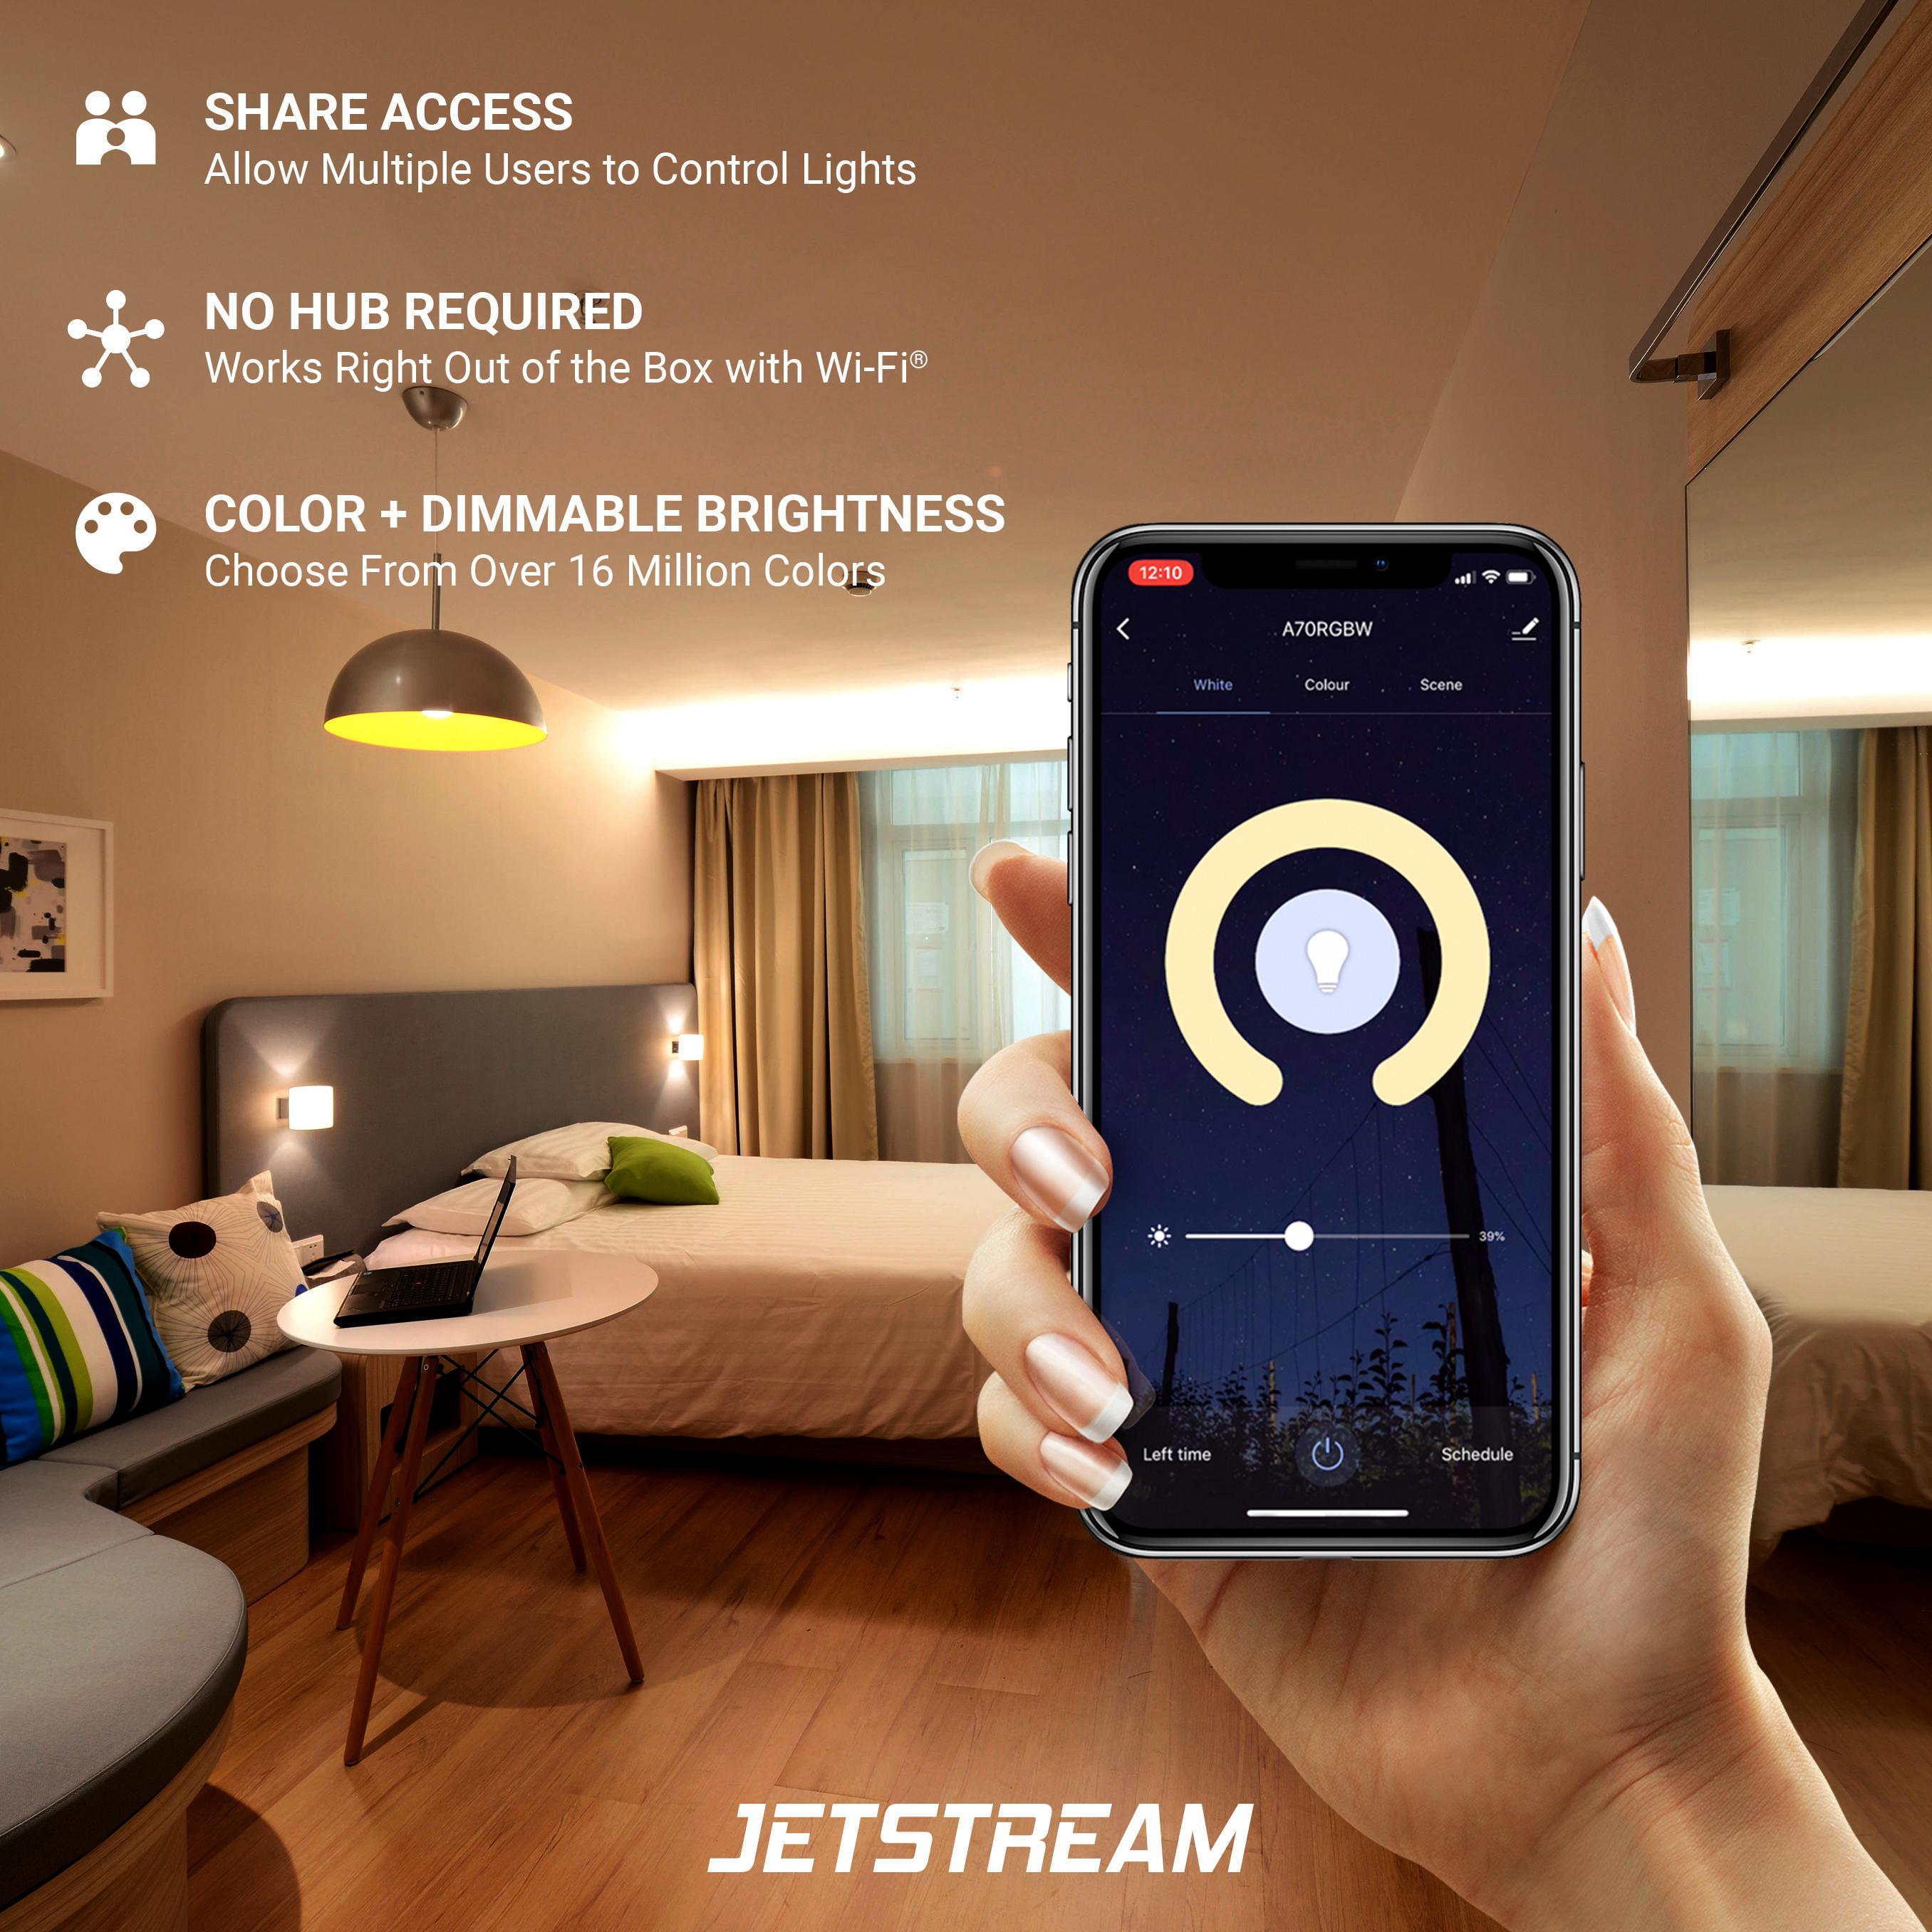 Jetstream Smart Home Bulb Kit: 2 Pack White Smart Bulb + 2 Pack Color Smart Bulb (Works with Google Assistant and Alexa) - image 3 of 10